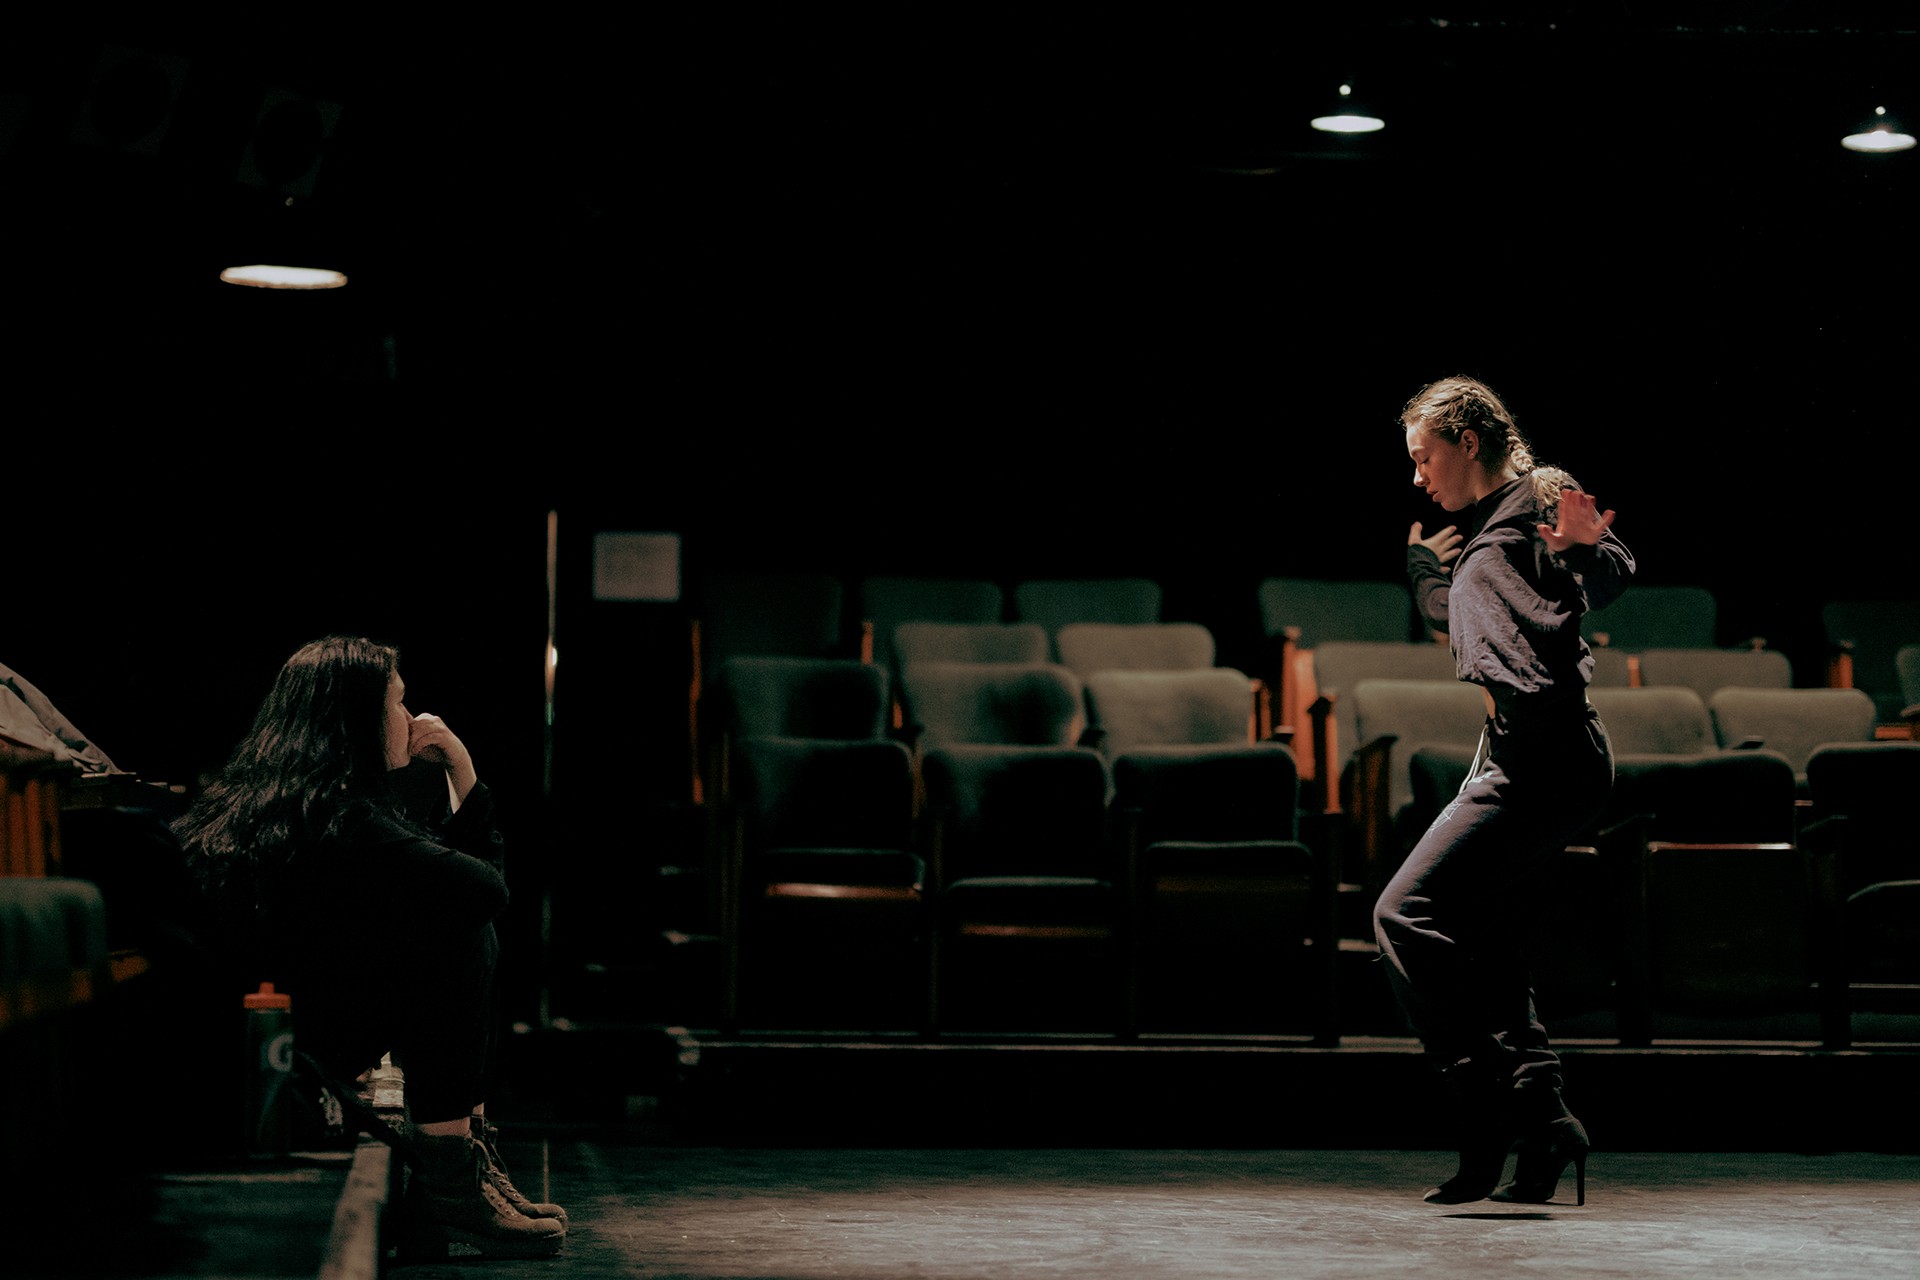 A choreographer instructing a dancer in a theatre space